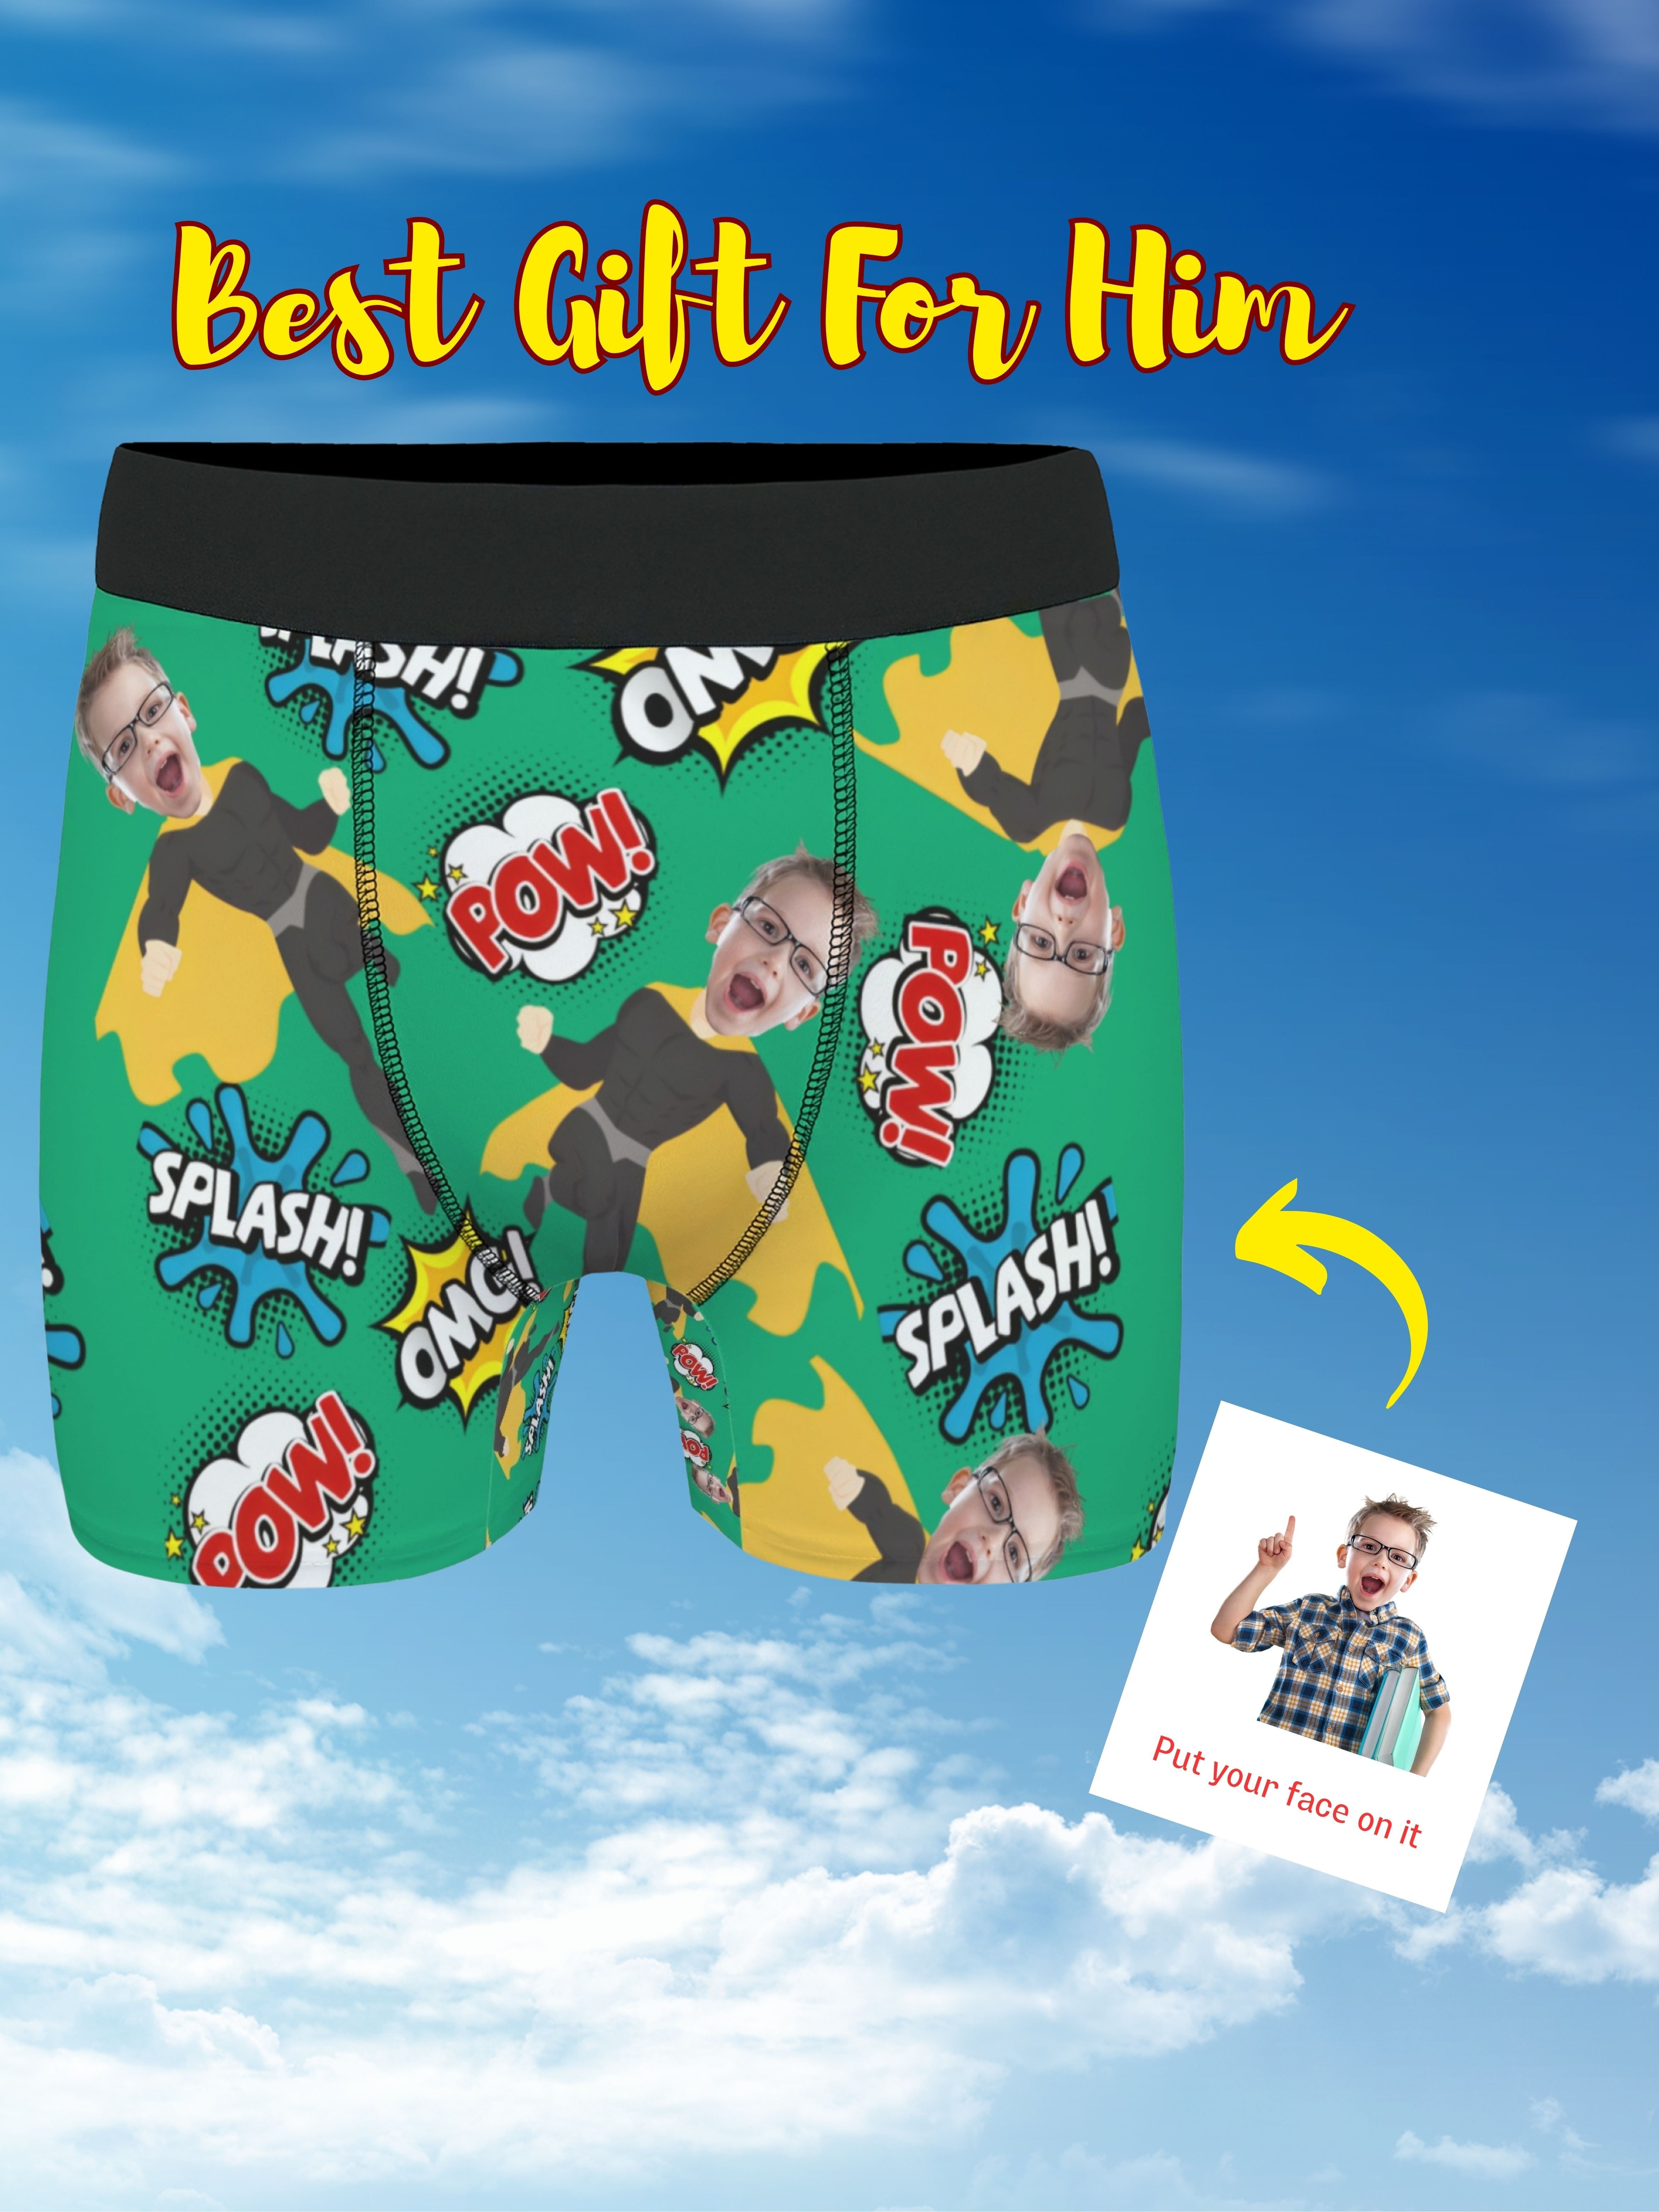 Best Deal for Custom Funny Men's Underwear Personalized Boxer